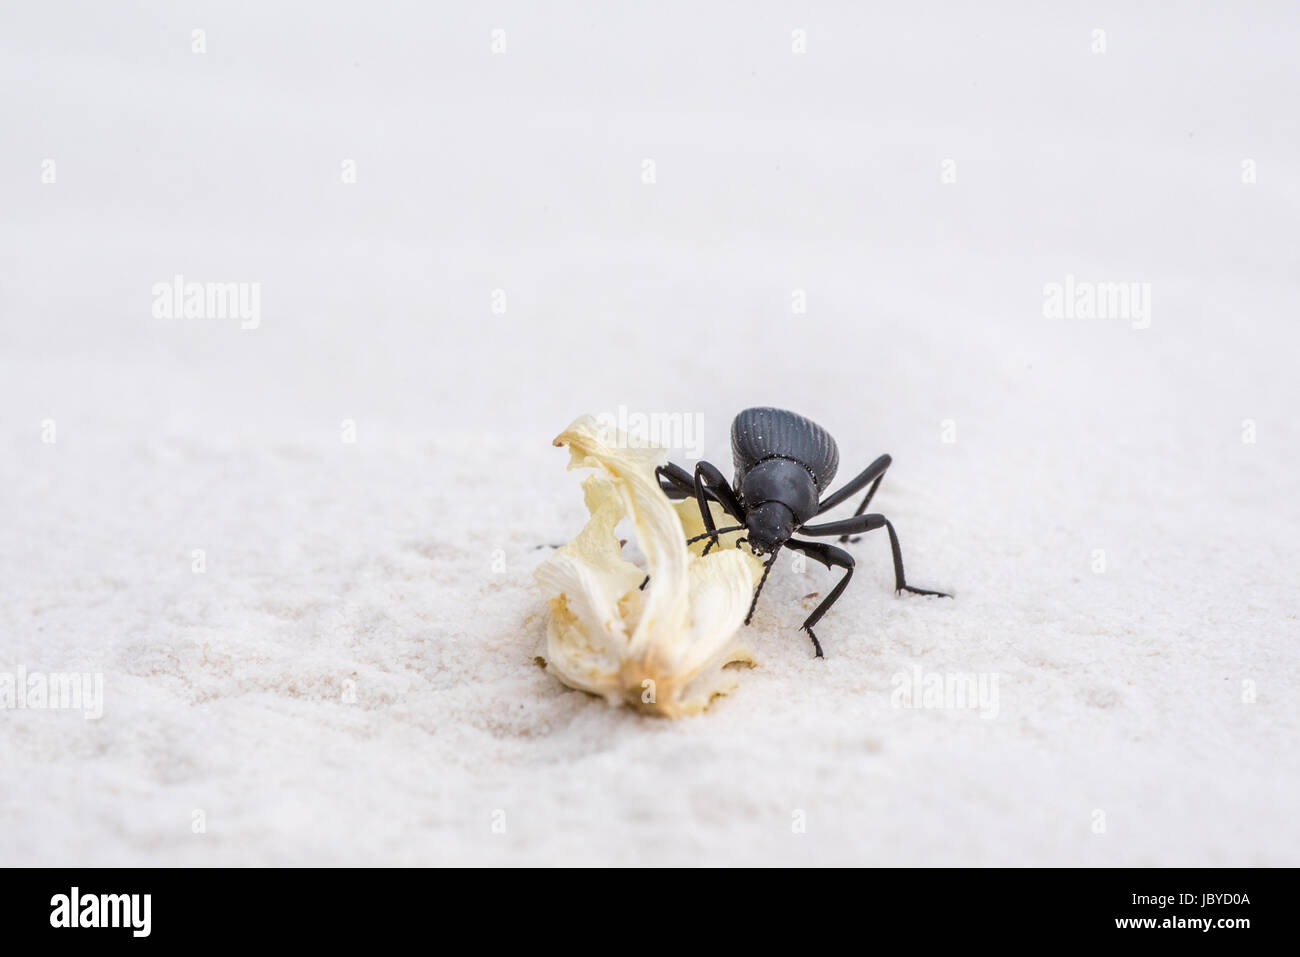 Darkling Beetle, (Elodea sp.), eating a Soaptree Yucca, (Yucca elate), flower.  White Sands National Monument, New Mexico, USA. Stock Photo